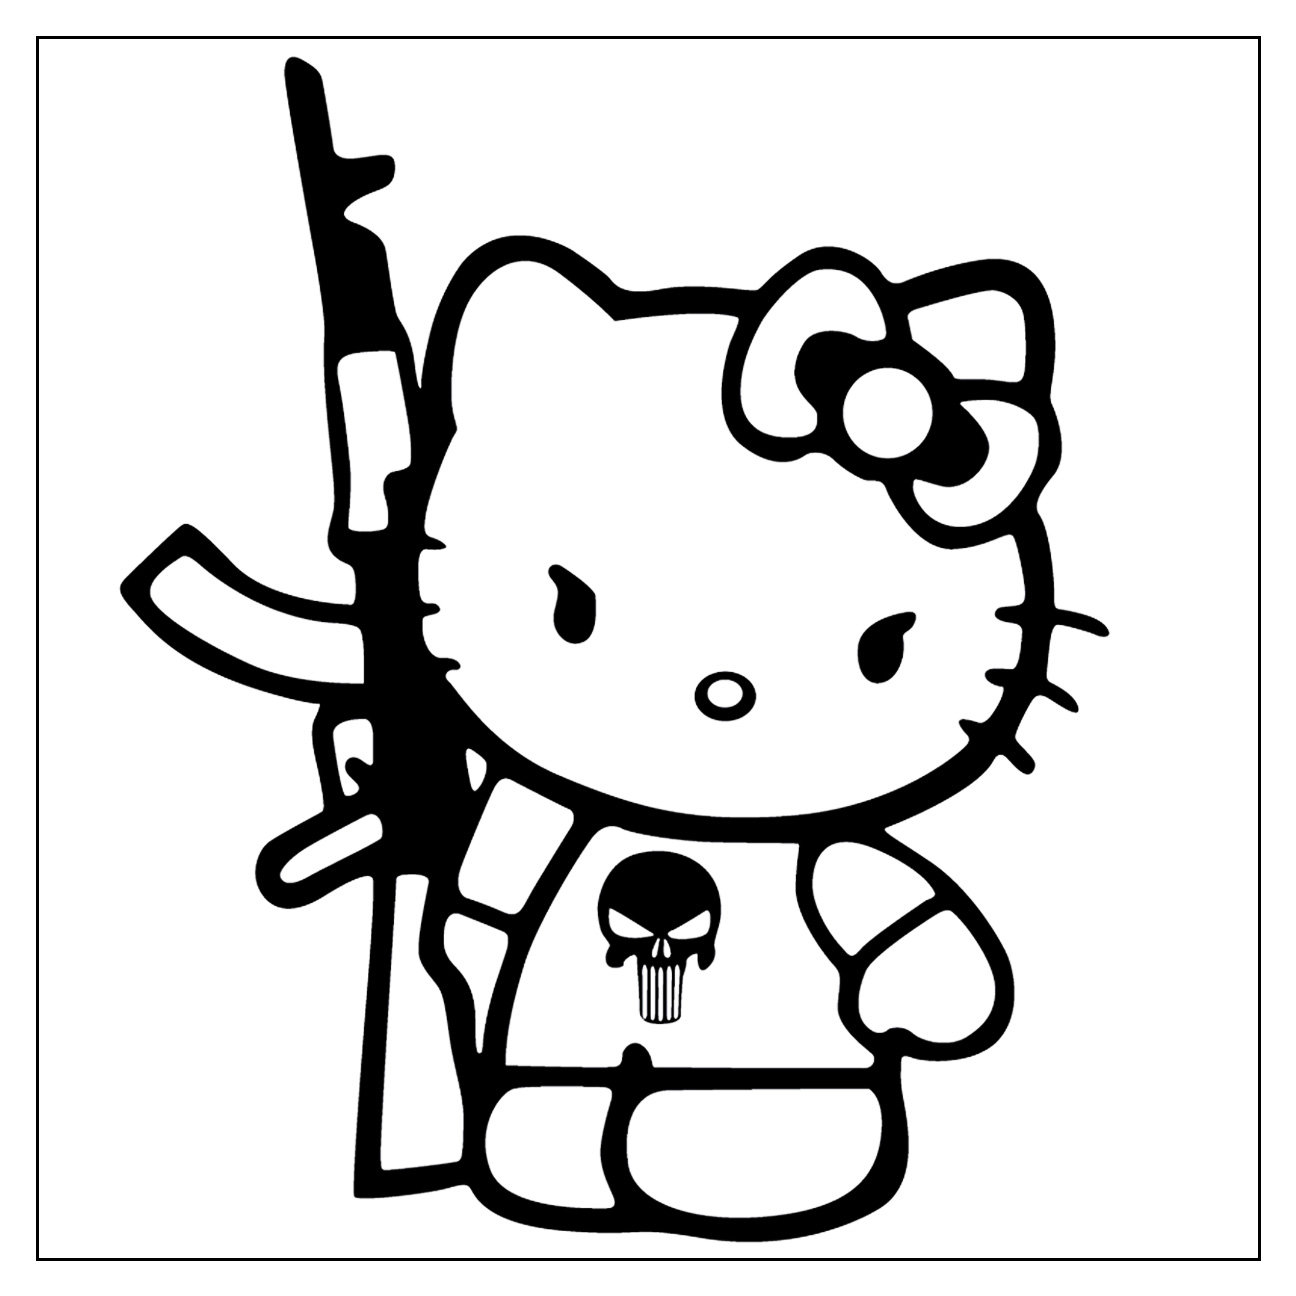 HELLO KITTY WITH AK47 DECAL STICKER **FREE SHIPPING**